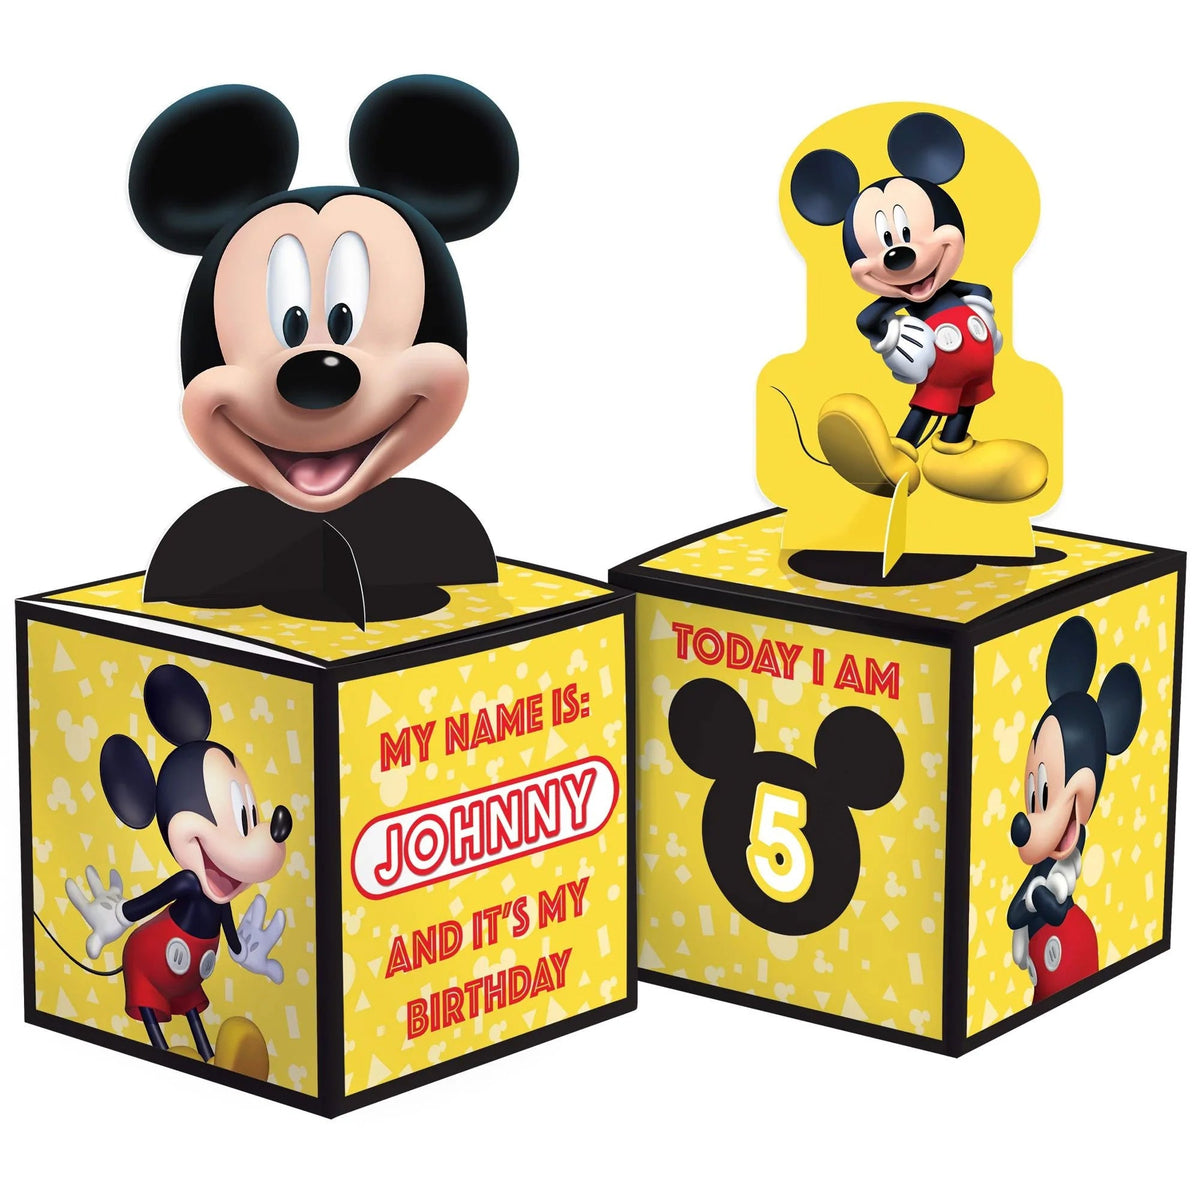 AMSCAN CA Kids Birthday Mickey Mouse Forever Birthday Paper Table Centerpiece Decoration Kit, 6 Count 192937367179